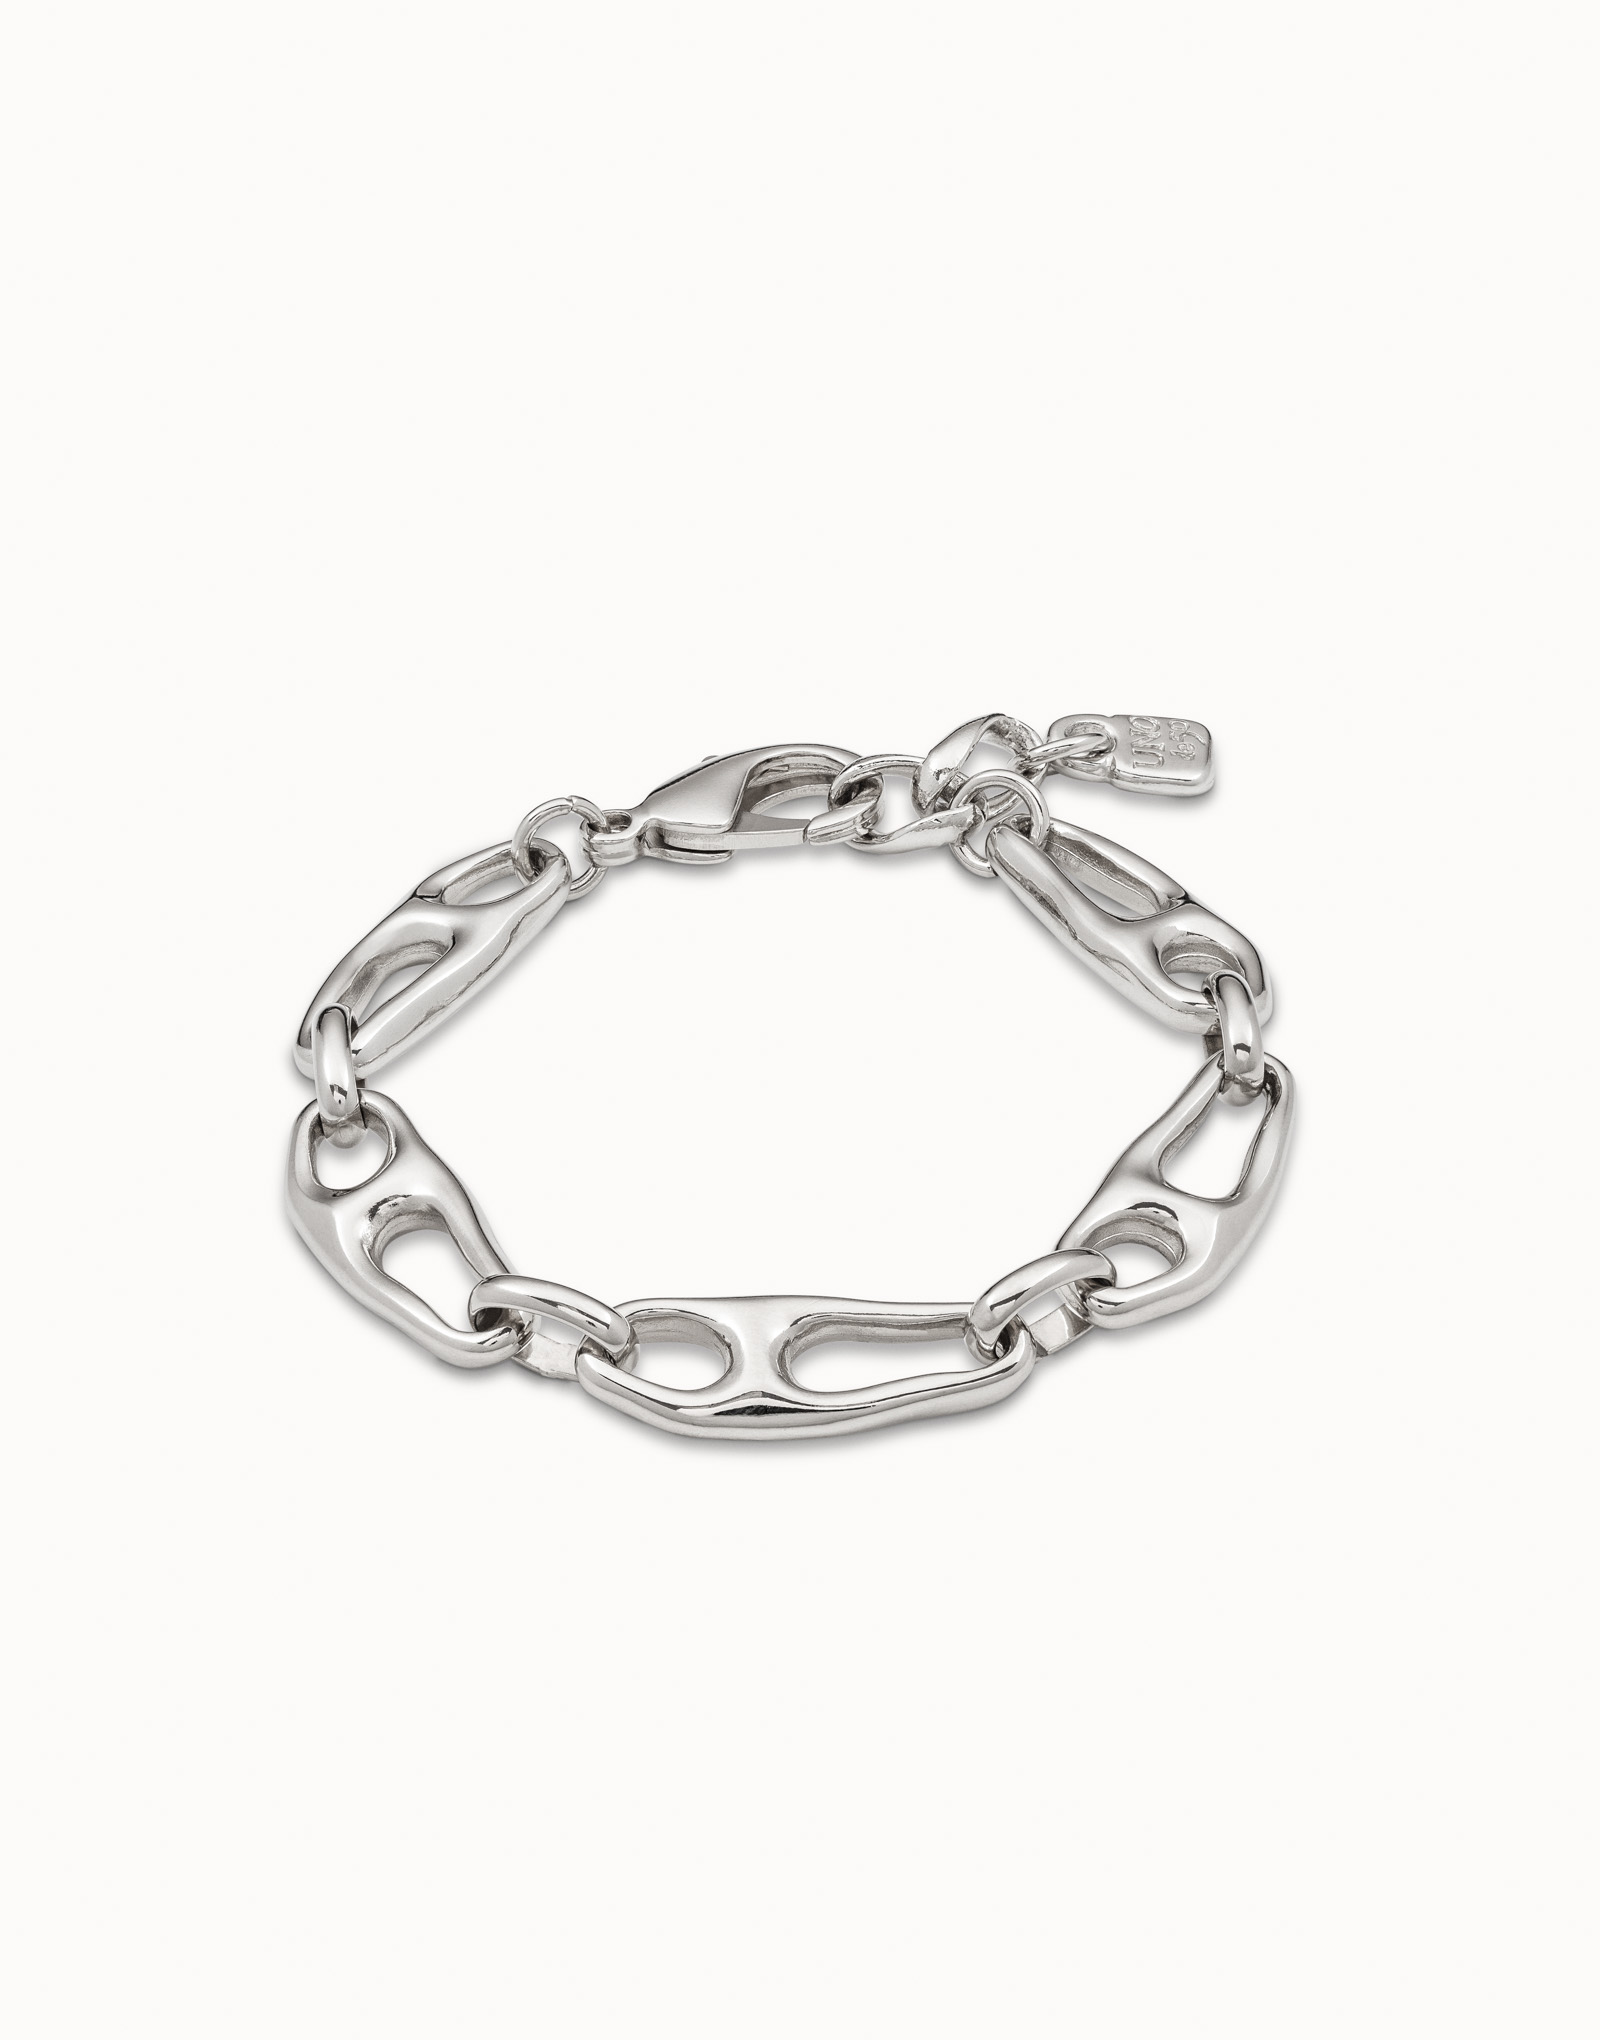 Bracciale placcato oro 18k a maglie e chiusura a moschettone, Argent, large image number null